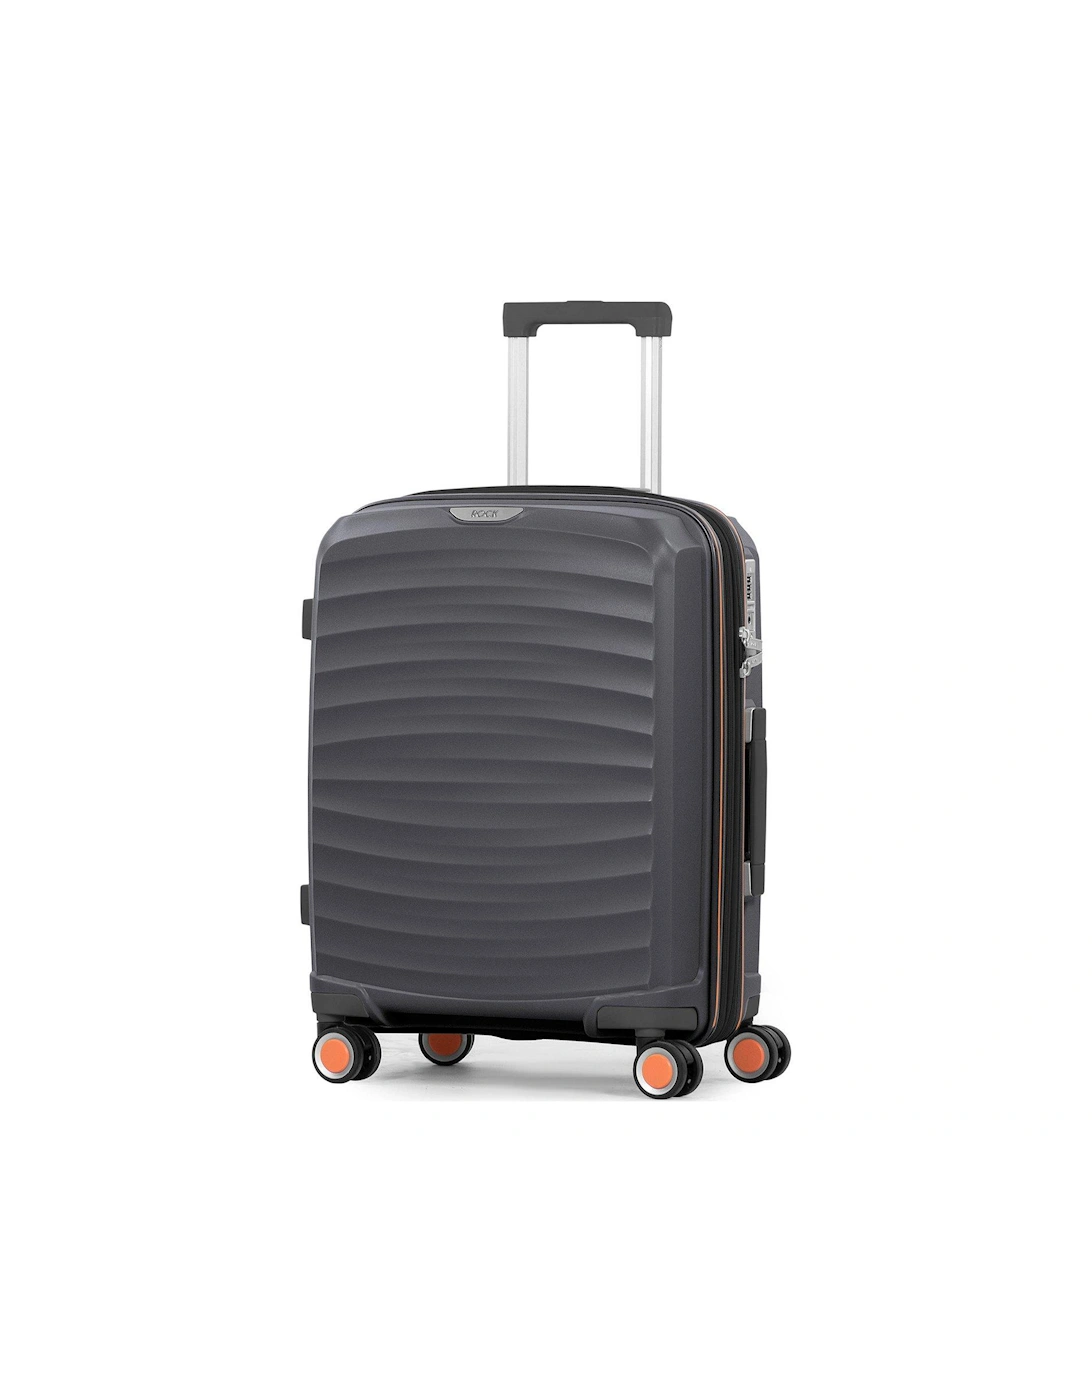 Sunwave Carry-on 8-Wheel Suitcase - Charcoal, 2 of 1